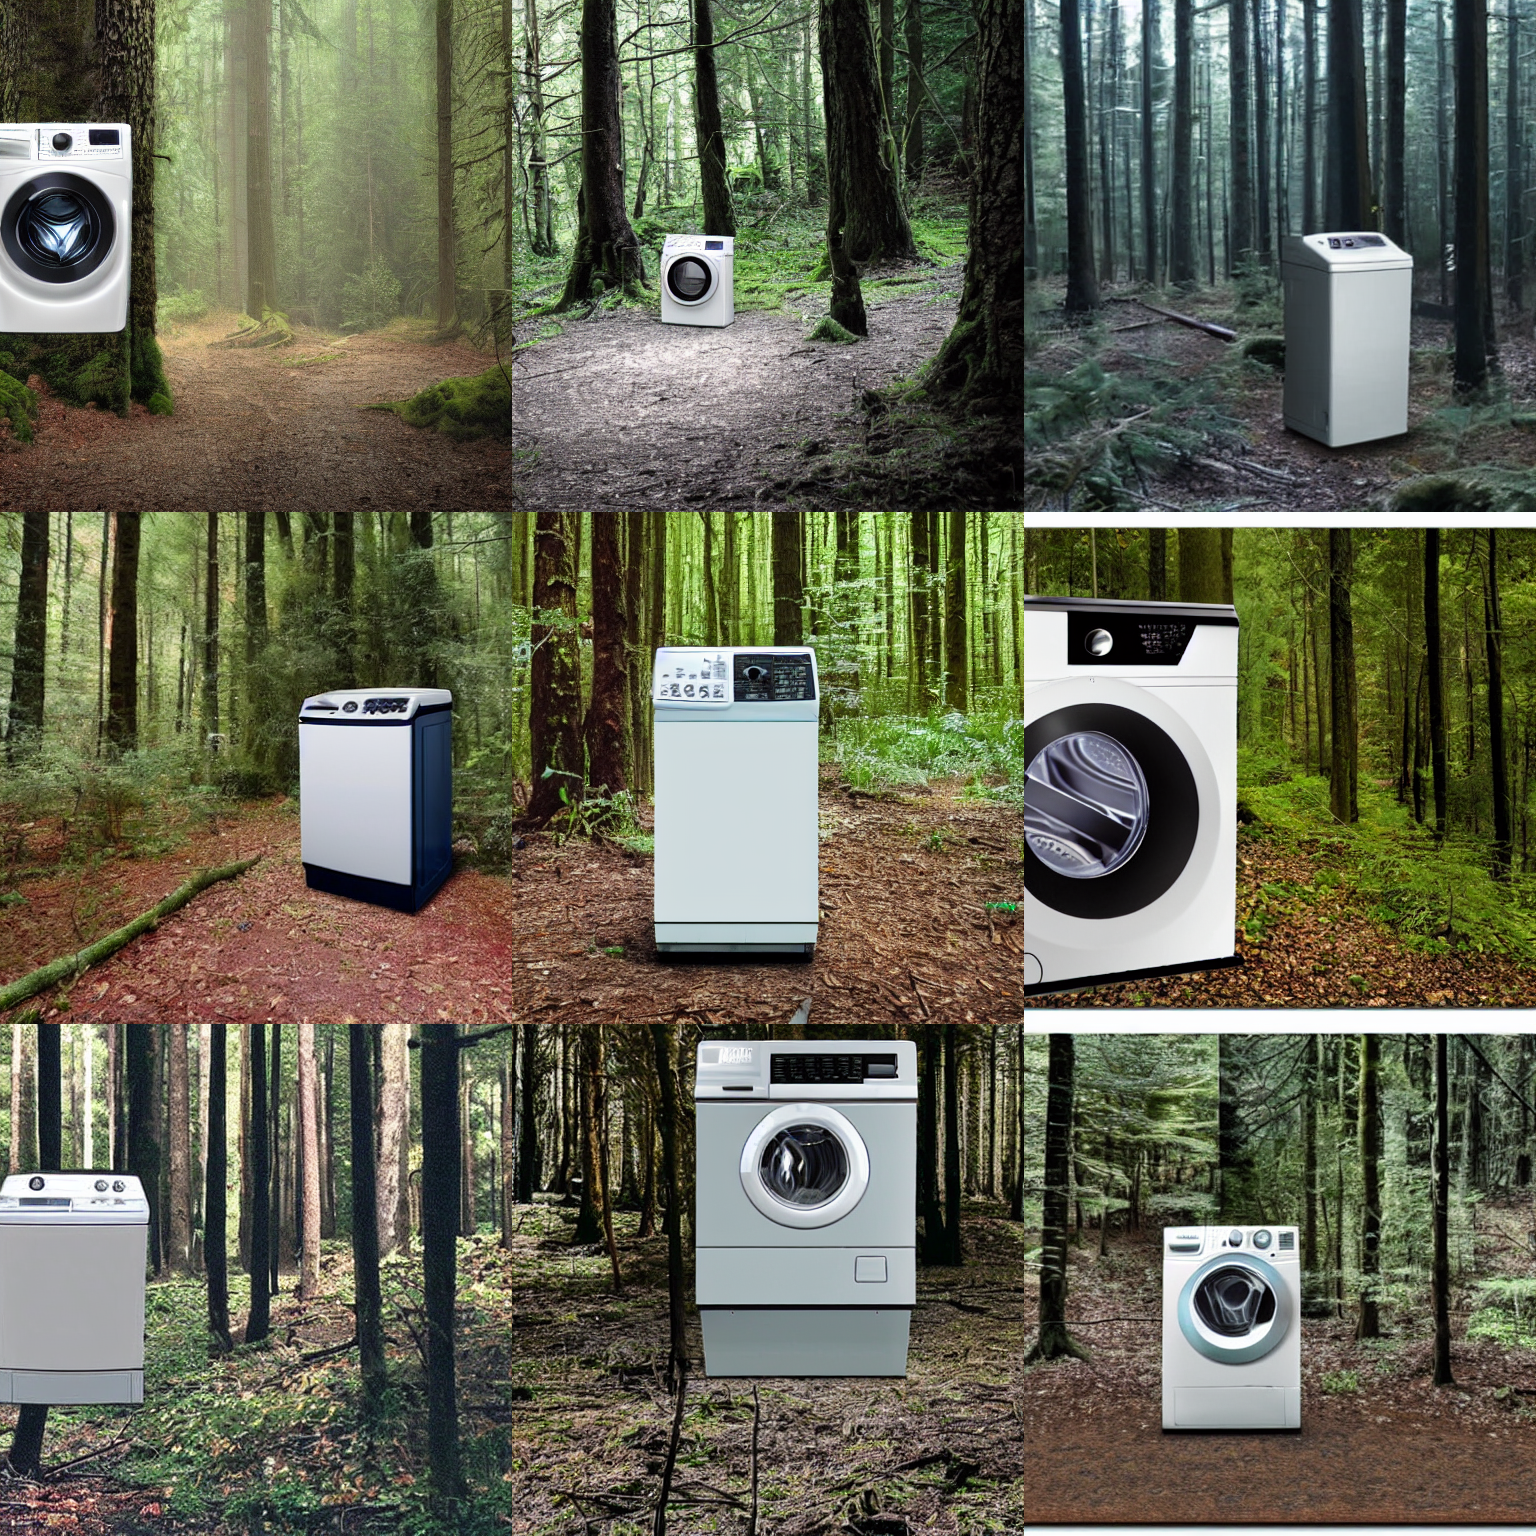 cctv footage of a washing machine in the forest